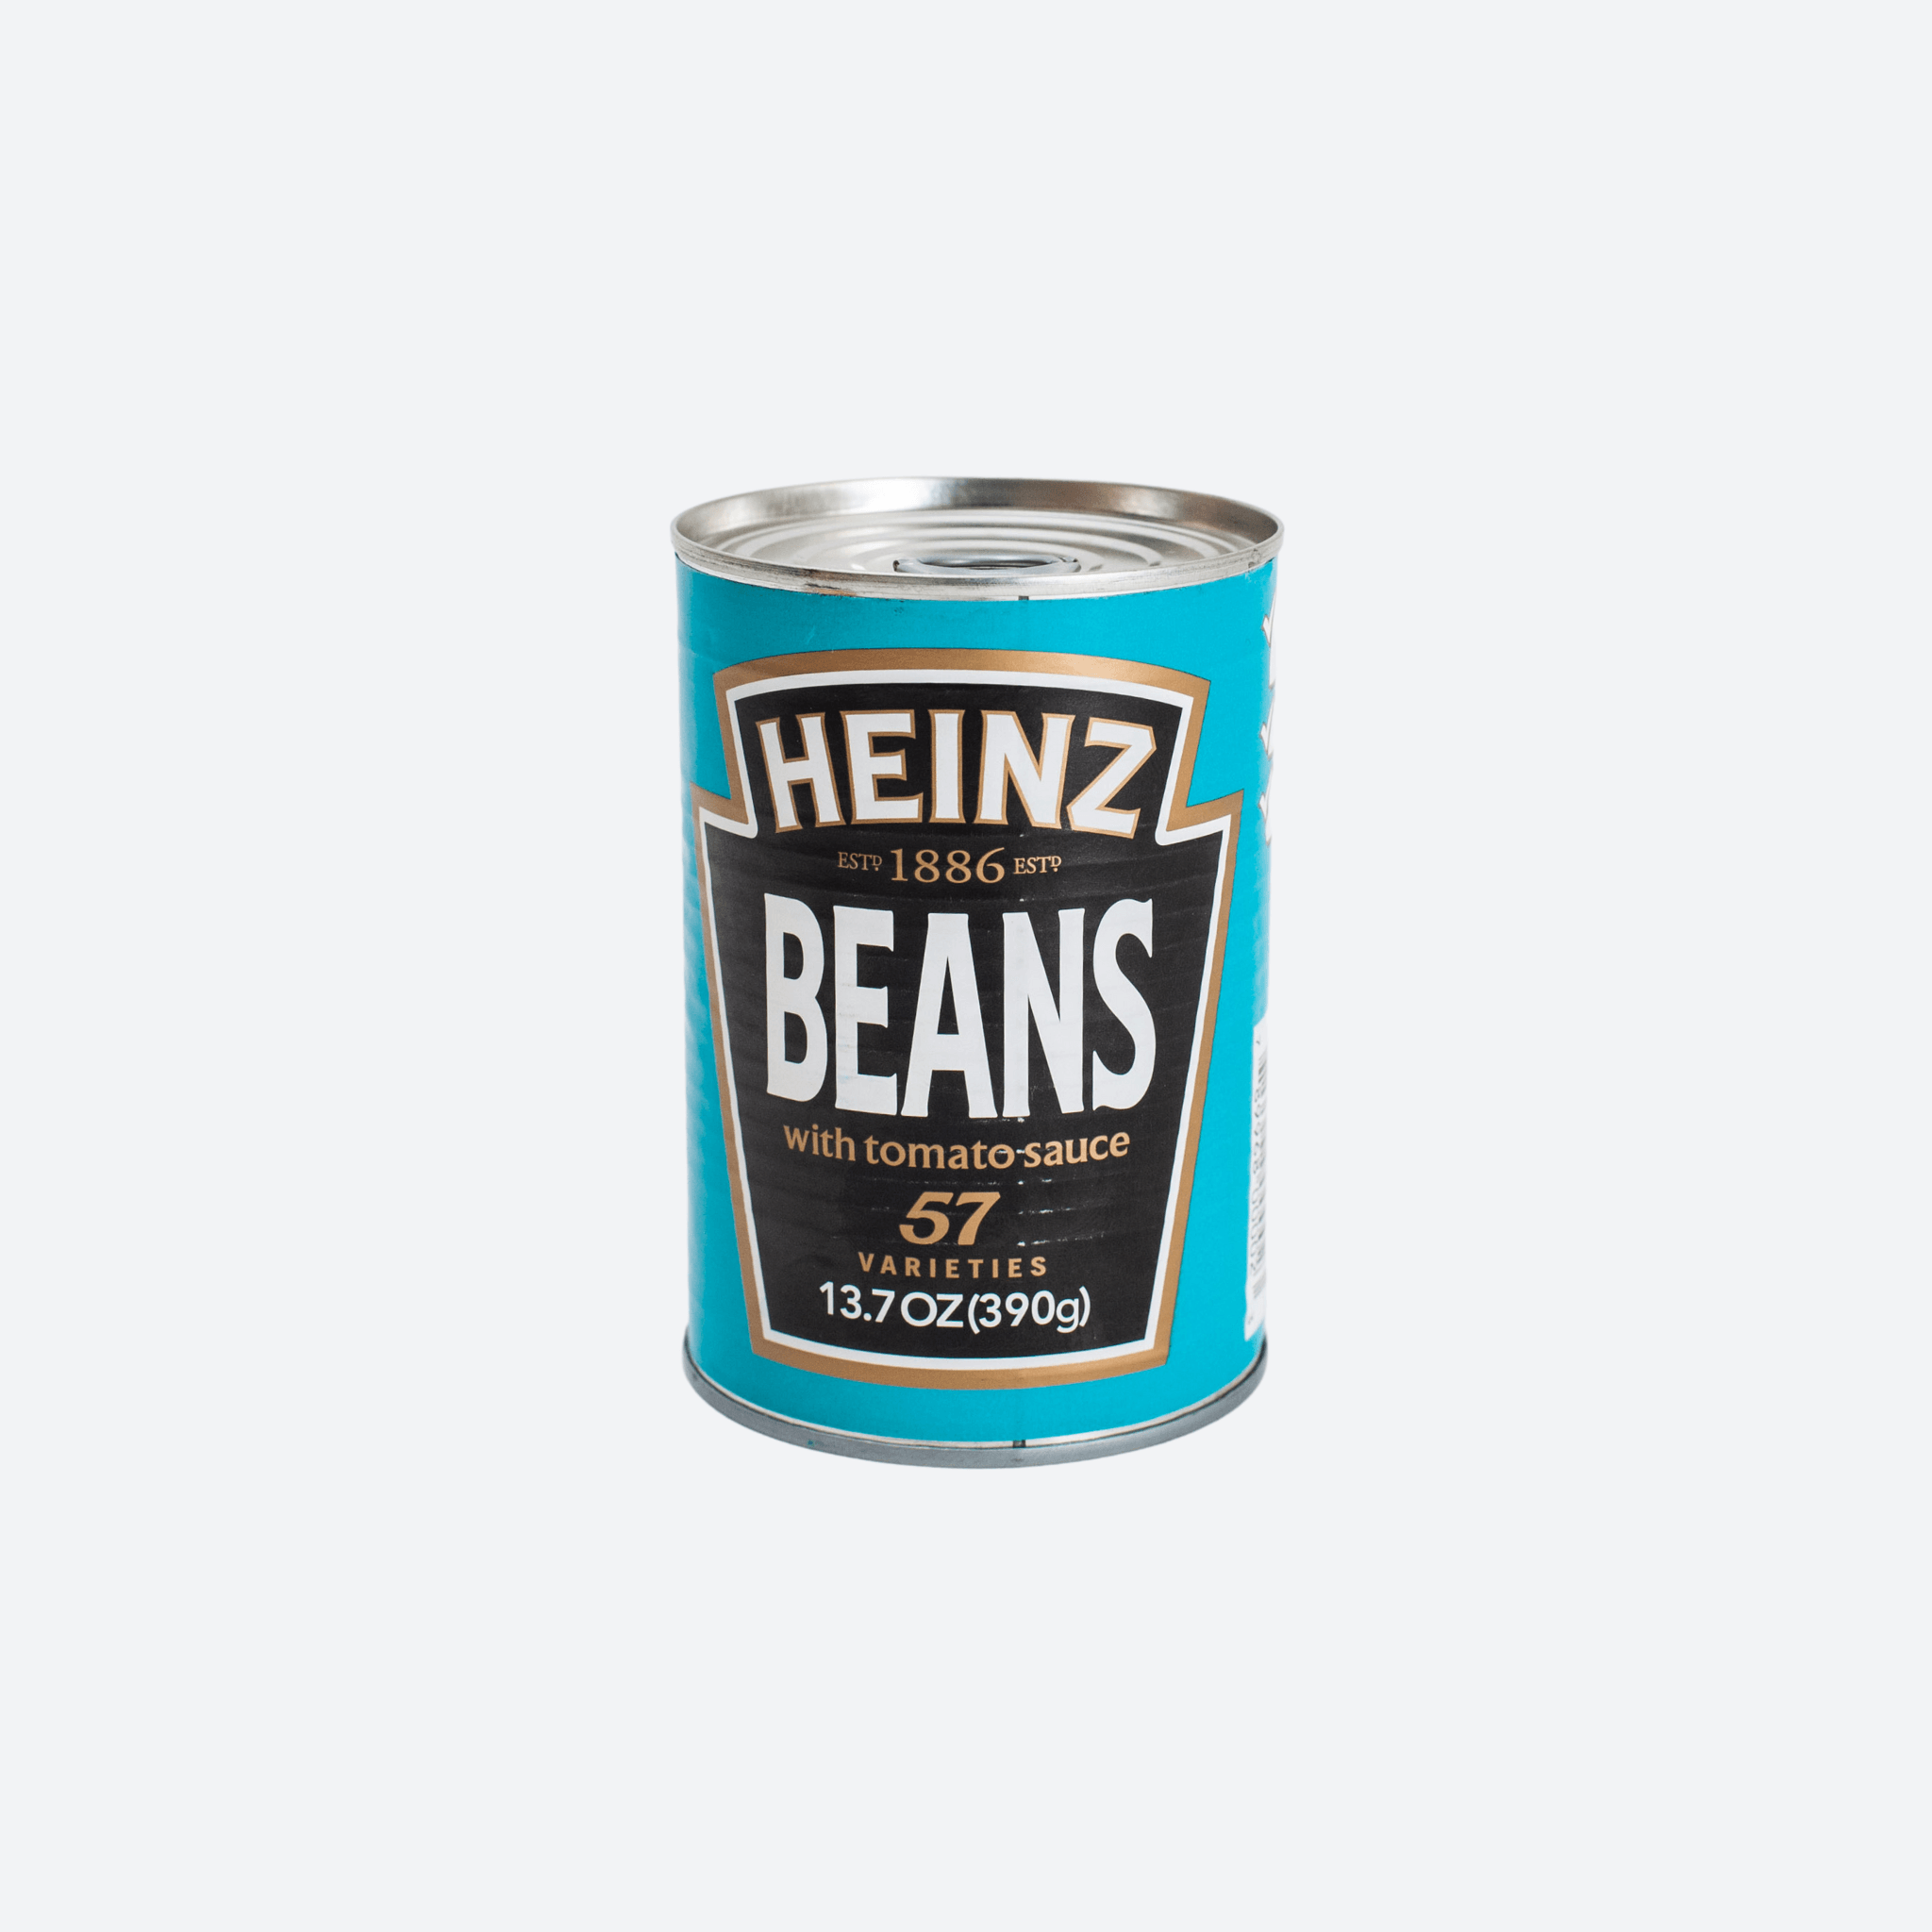 Heinz Beans with Tomato Sauce 13.7oz - Classic Comfort in Every Bite - image 1 of 5